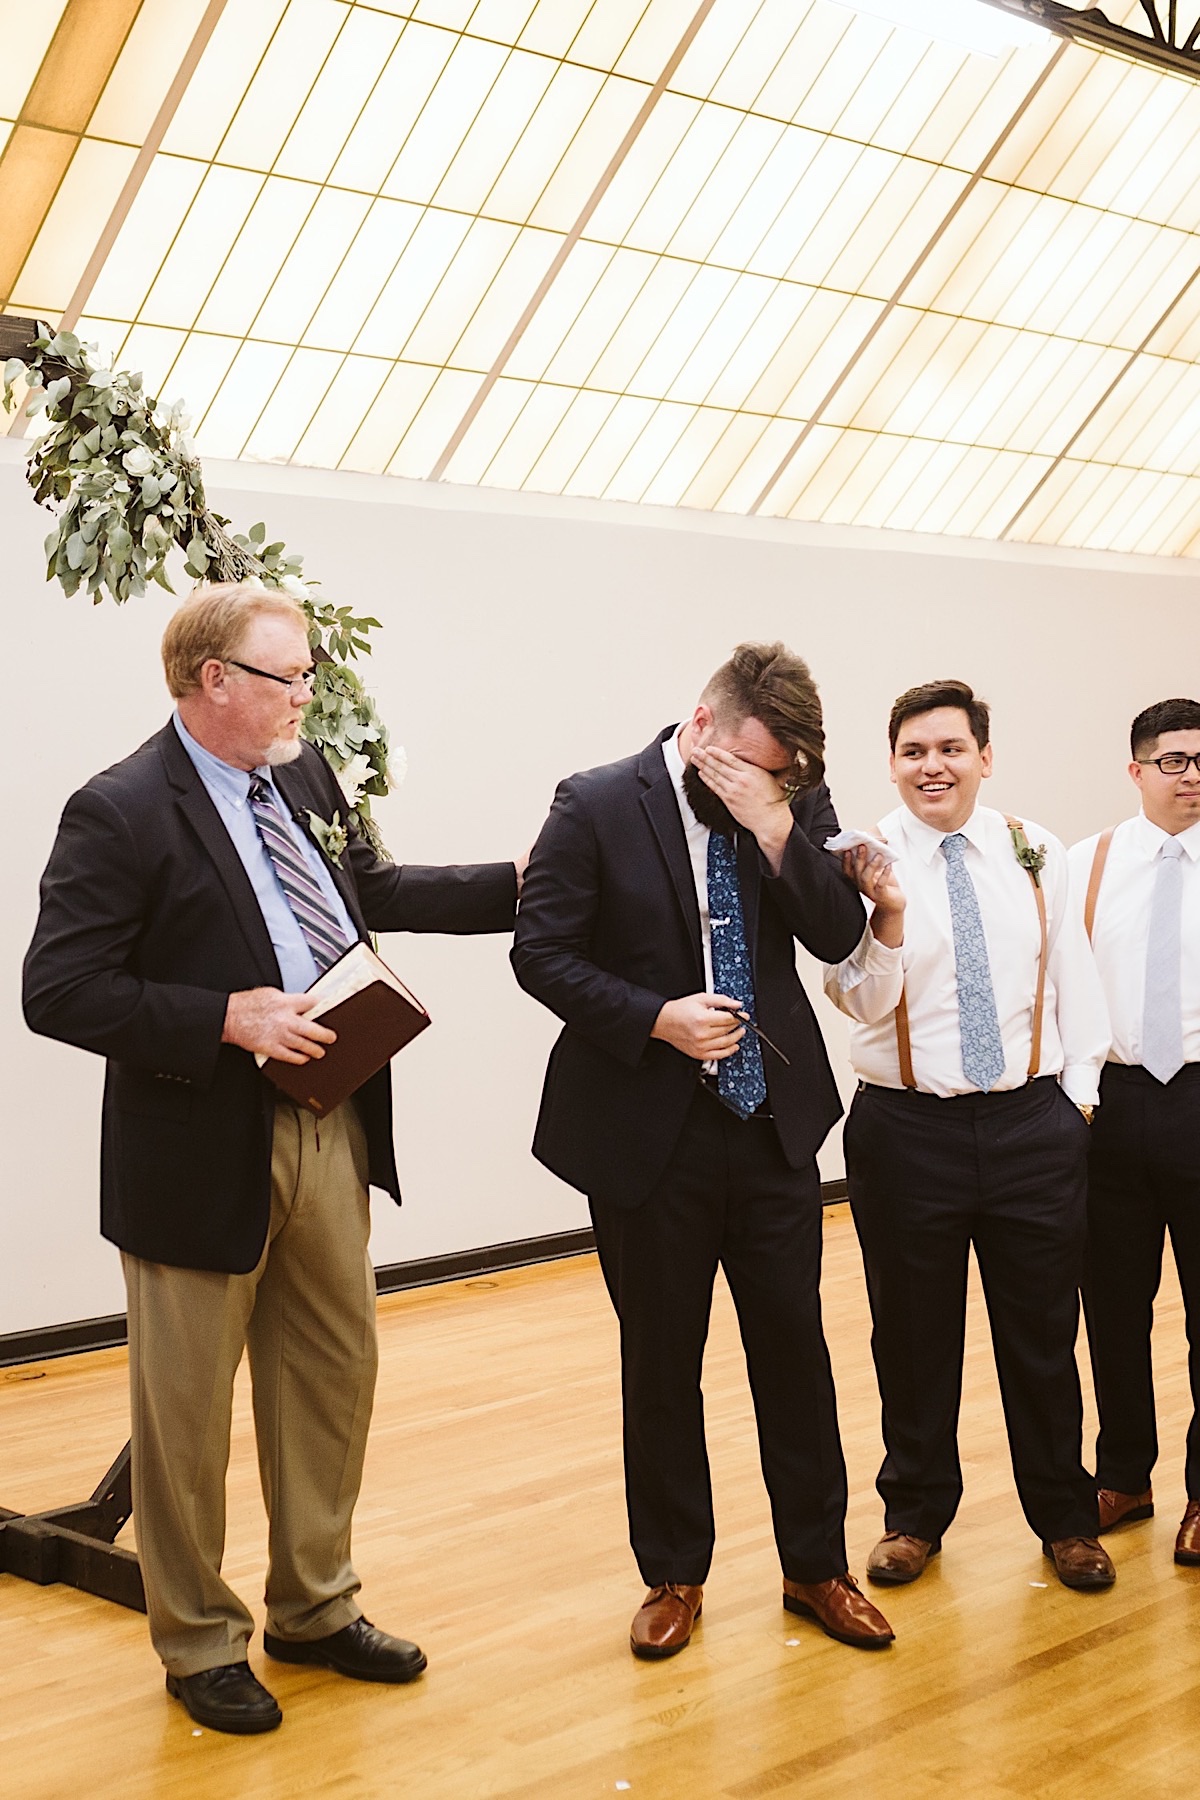 Officiant and best man reach toward groom who is wiping tears from his eyes.